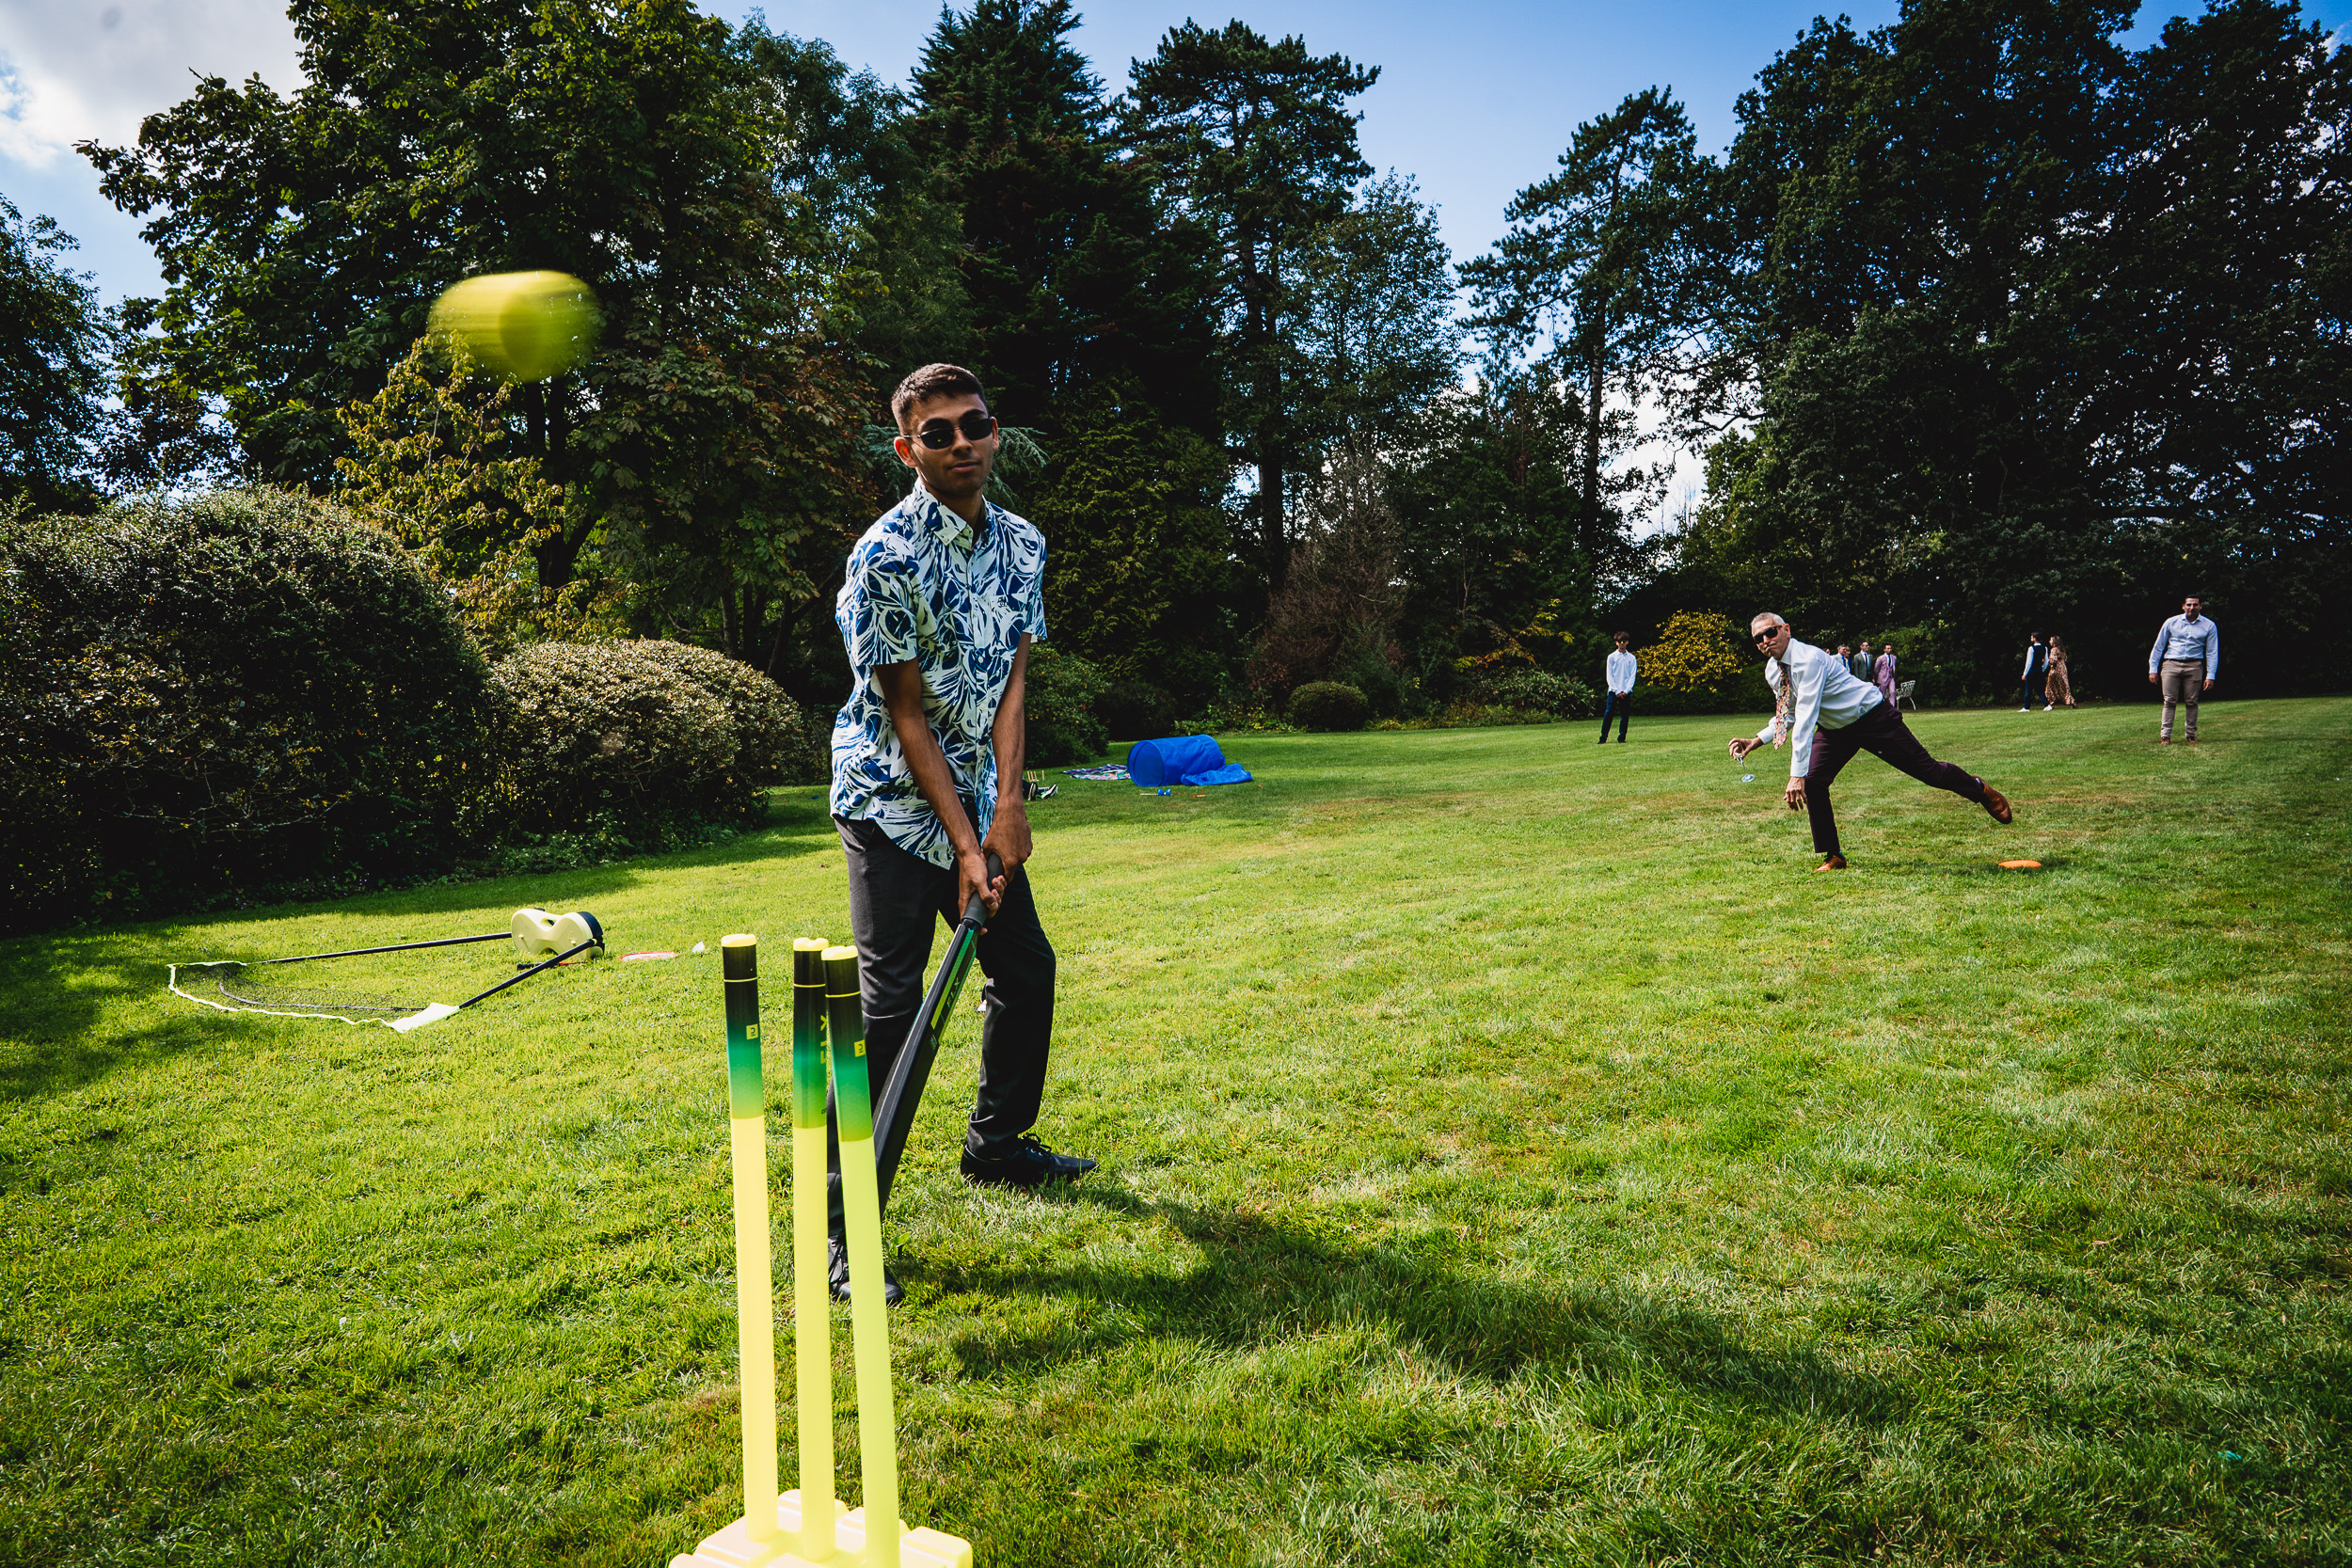 A group of people playing cricket in the picturesque Ridge Farm garden in Surrey.